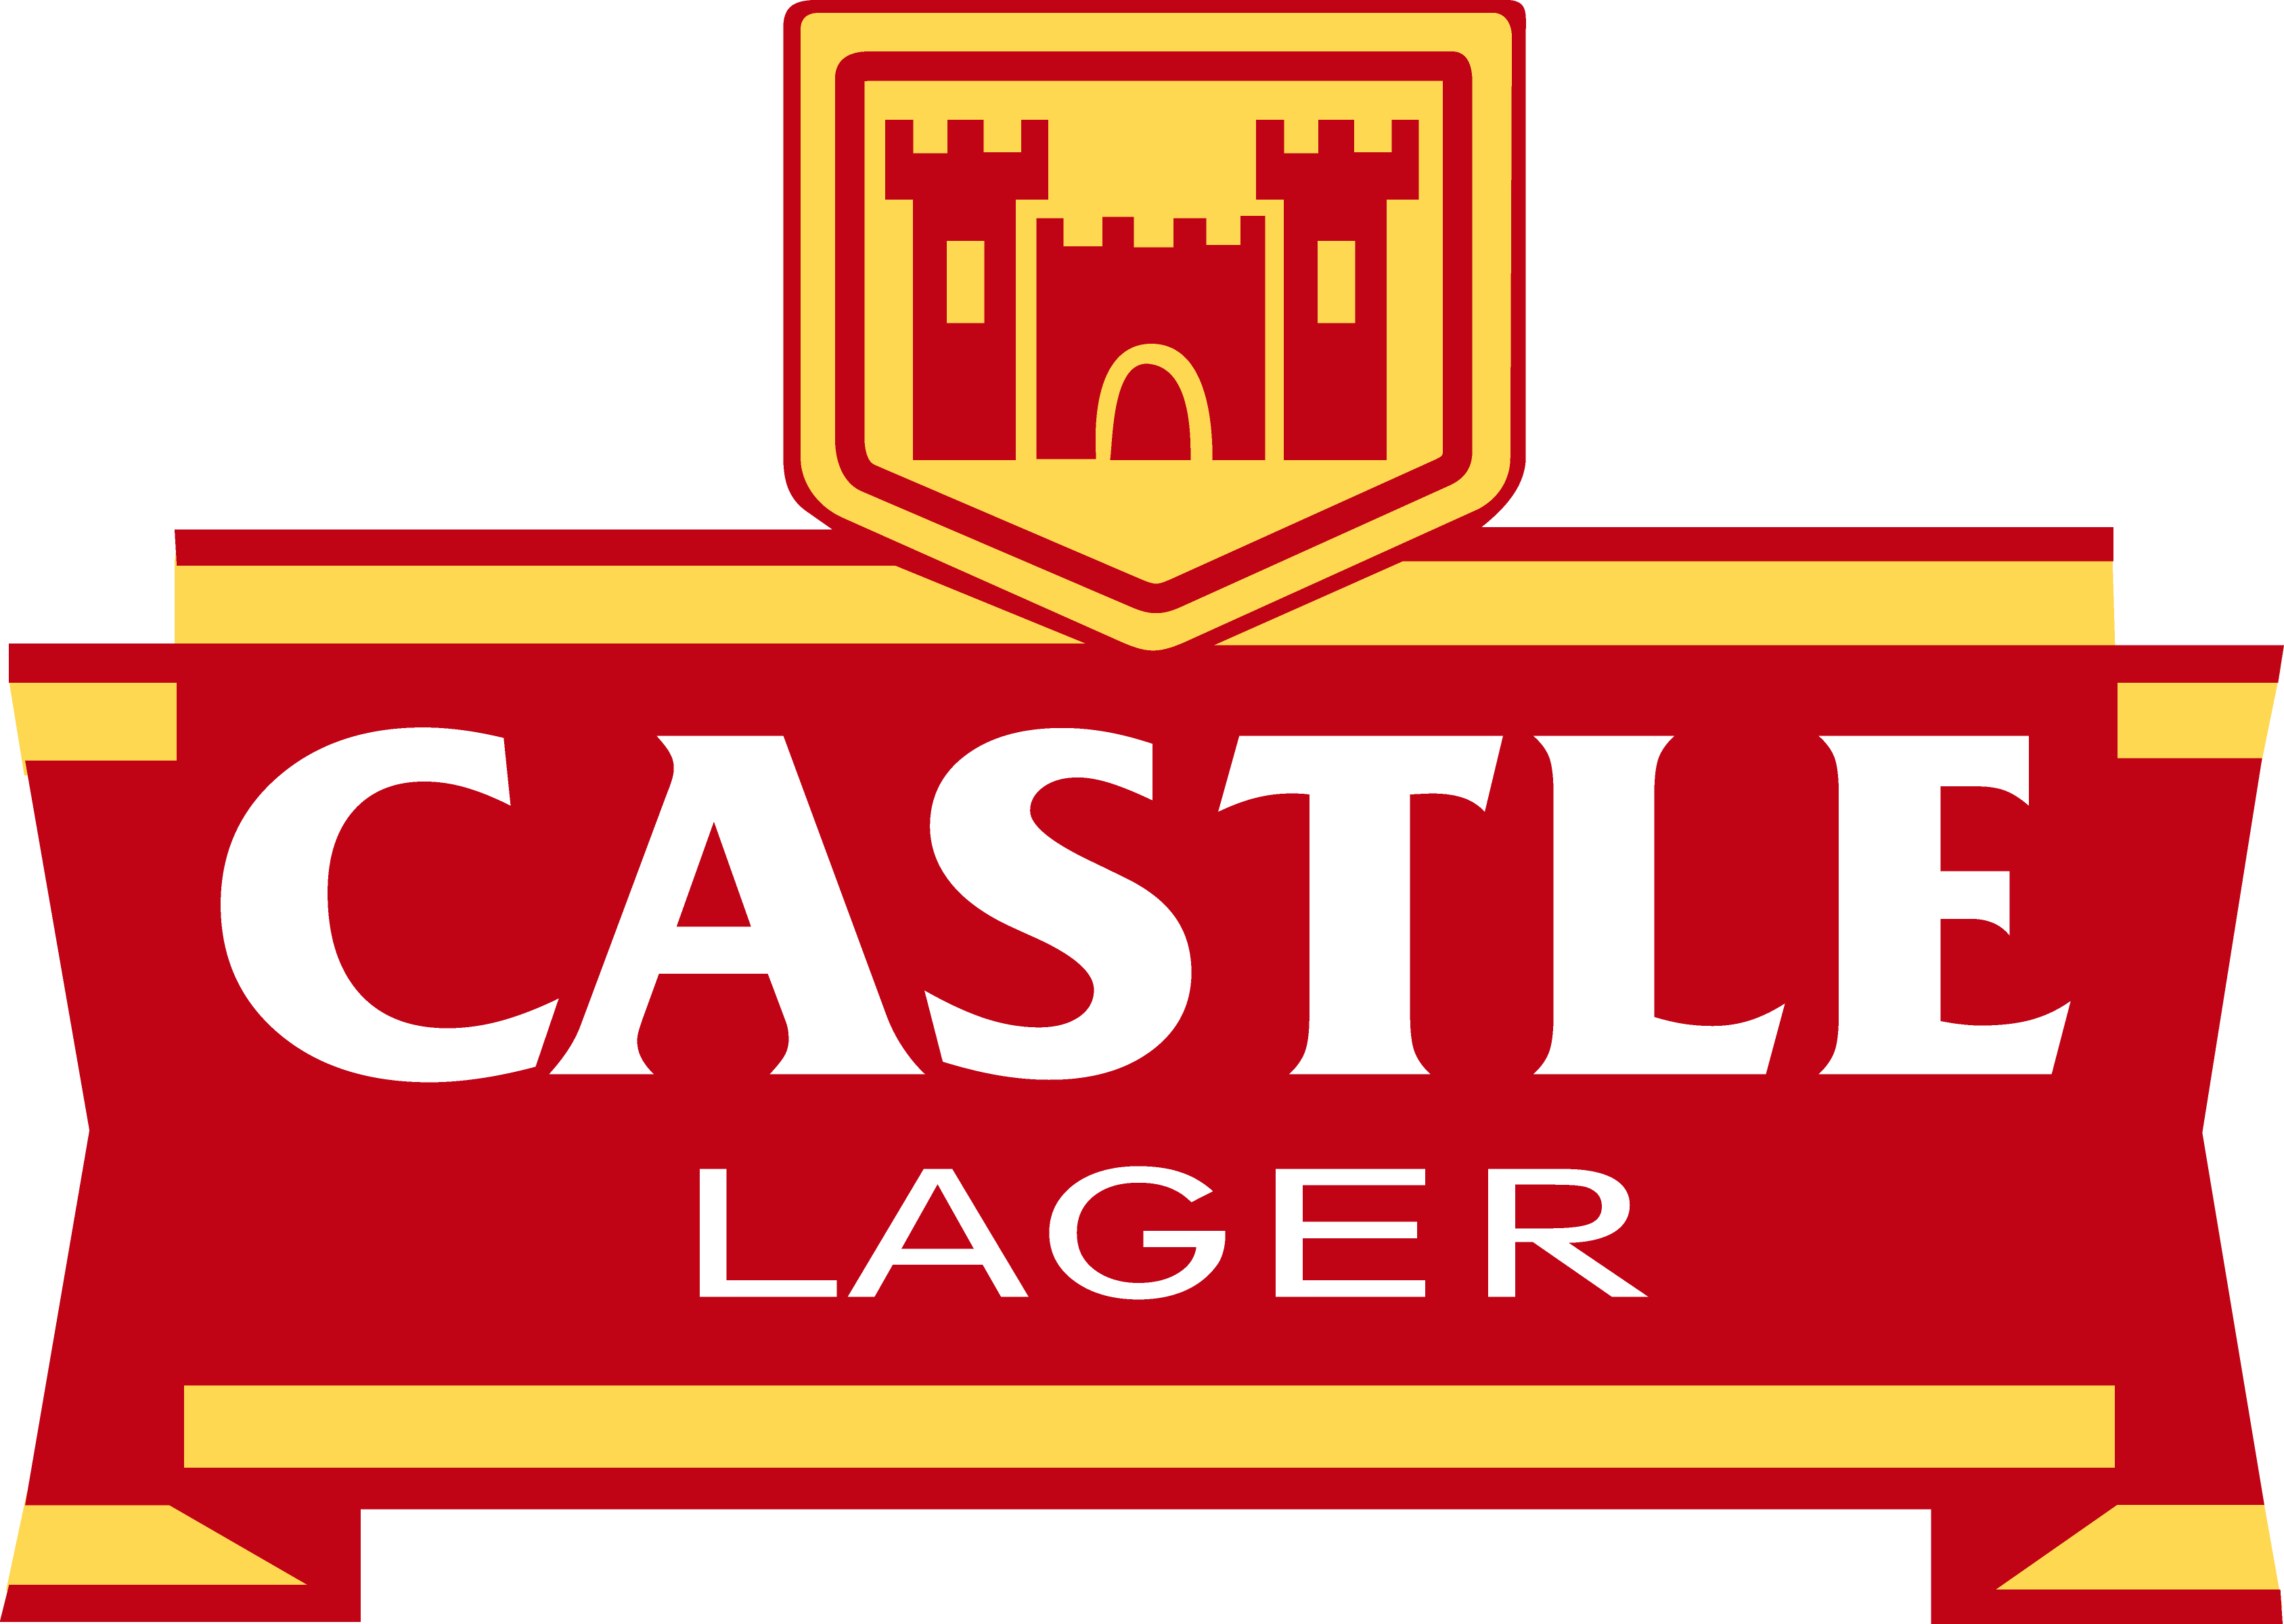 Castle Beer Logo - Castle Lager. My favourite! | Places and Memories | Castle, Logos, Beer